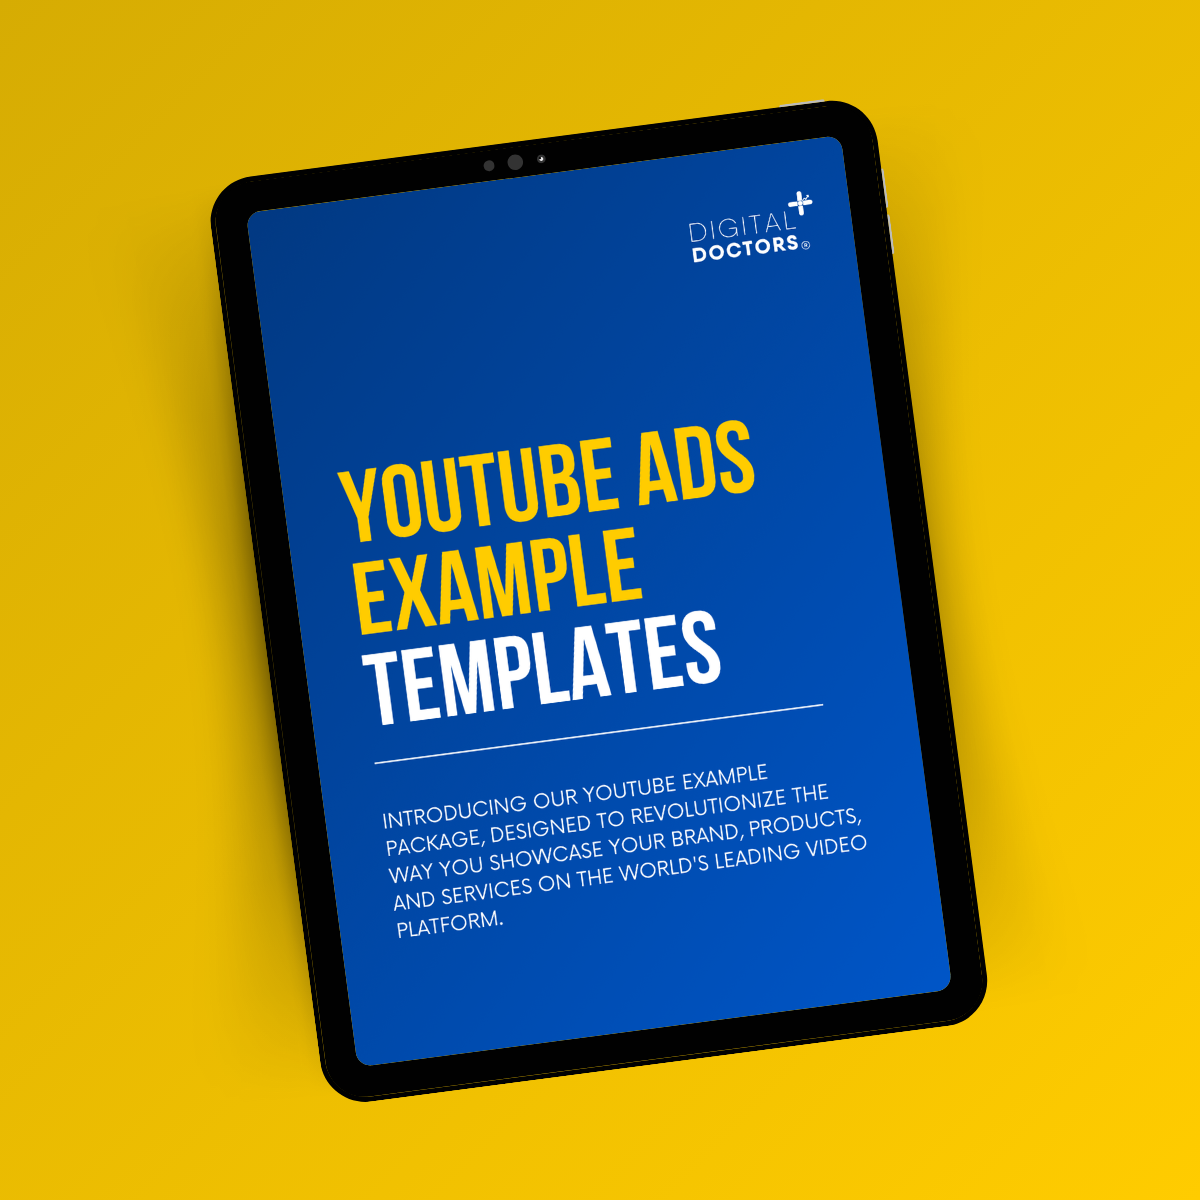 YouTube Ads Example Templates